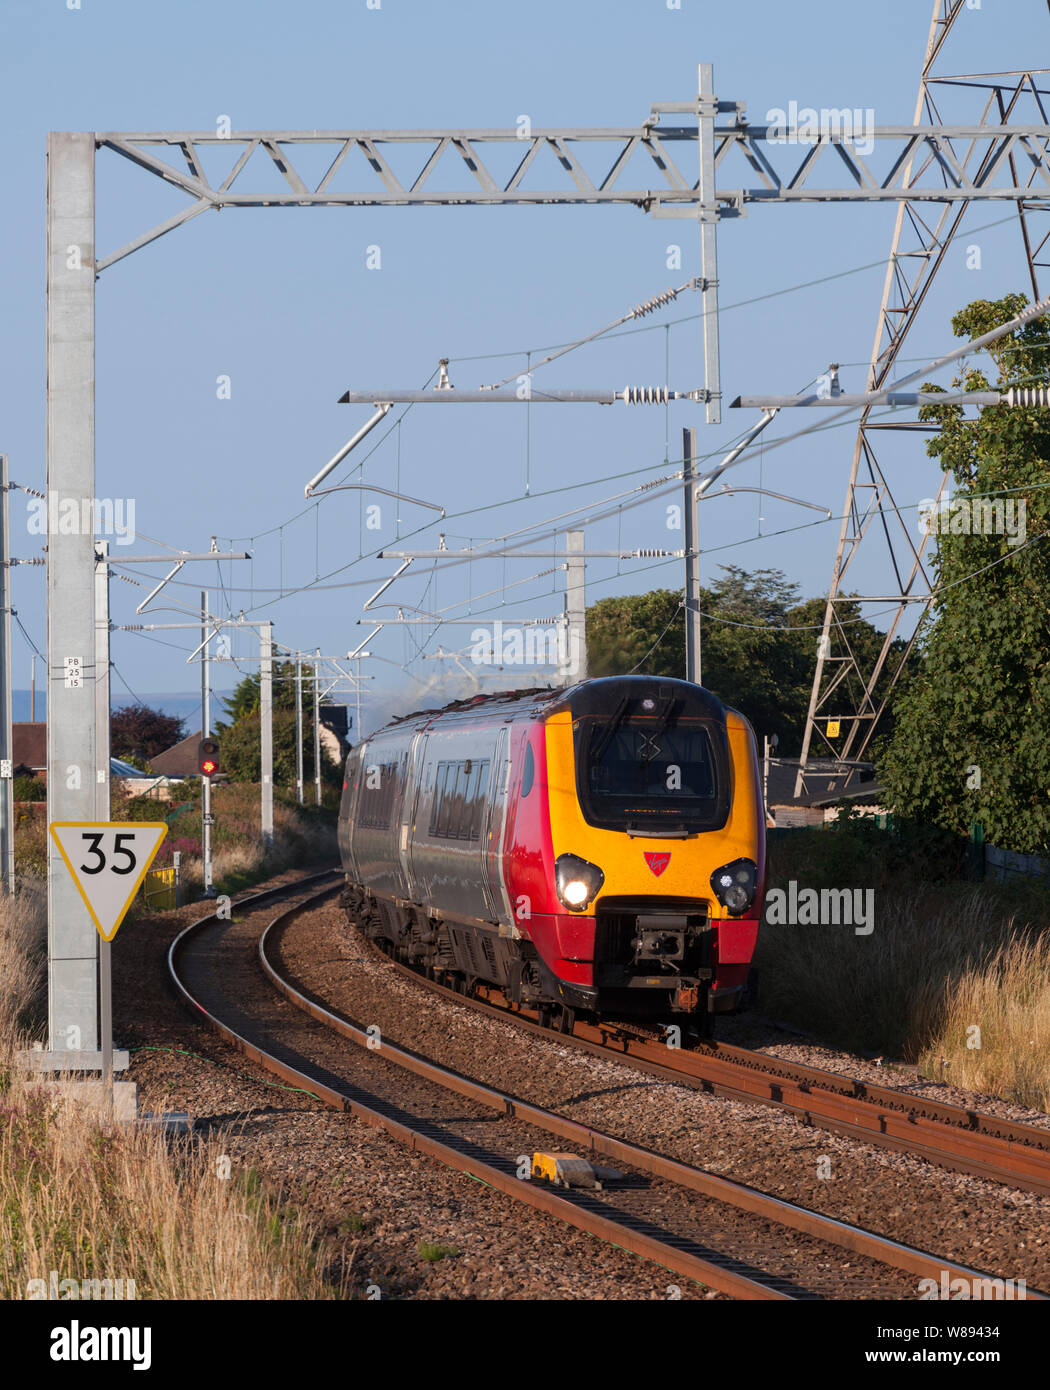 Virgin trains class 221 voyager train passing Carleton on the line to Blackpool north with a London to Blackpool virgin train Stock Photo